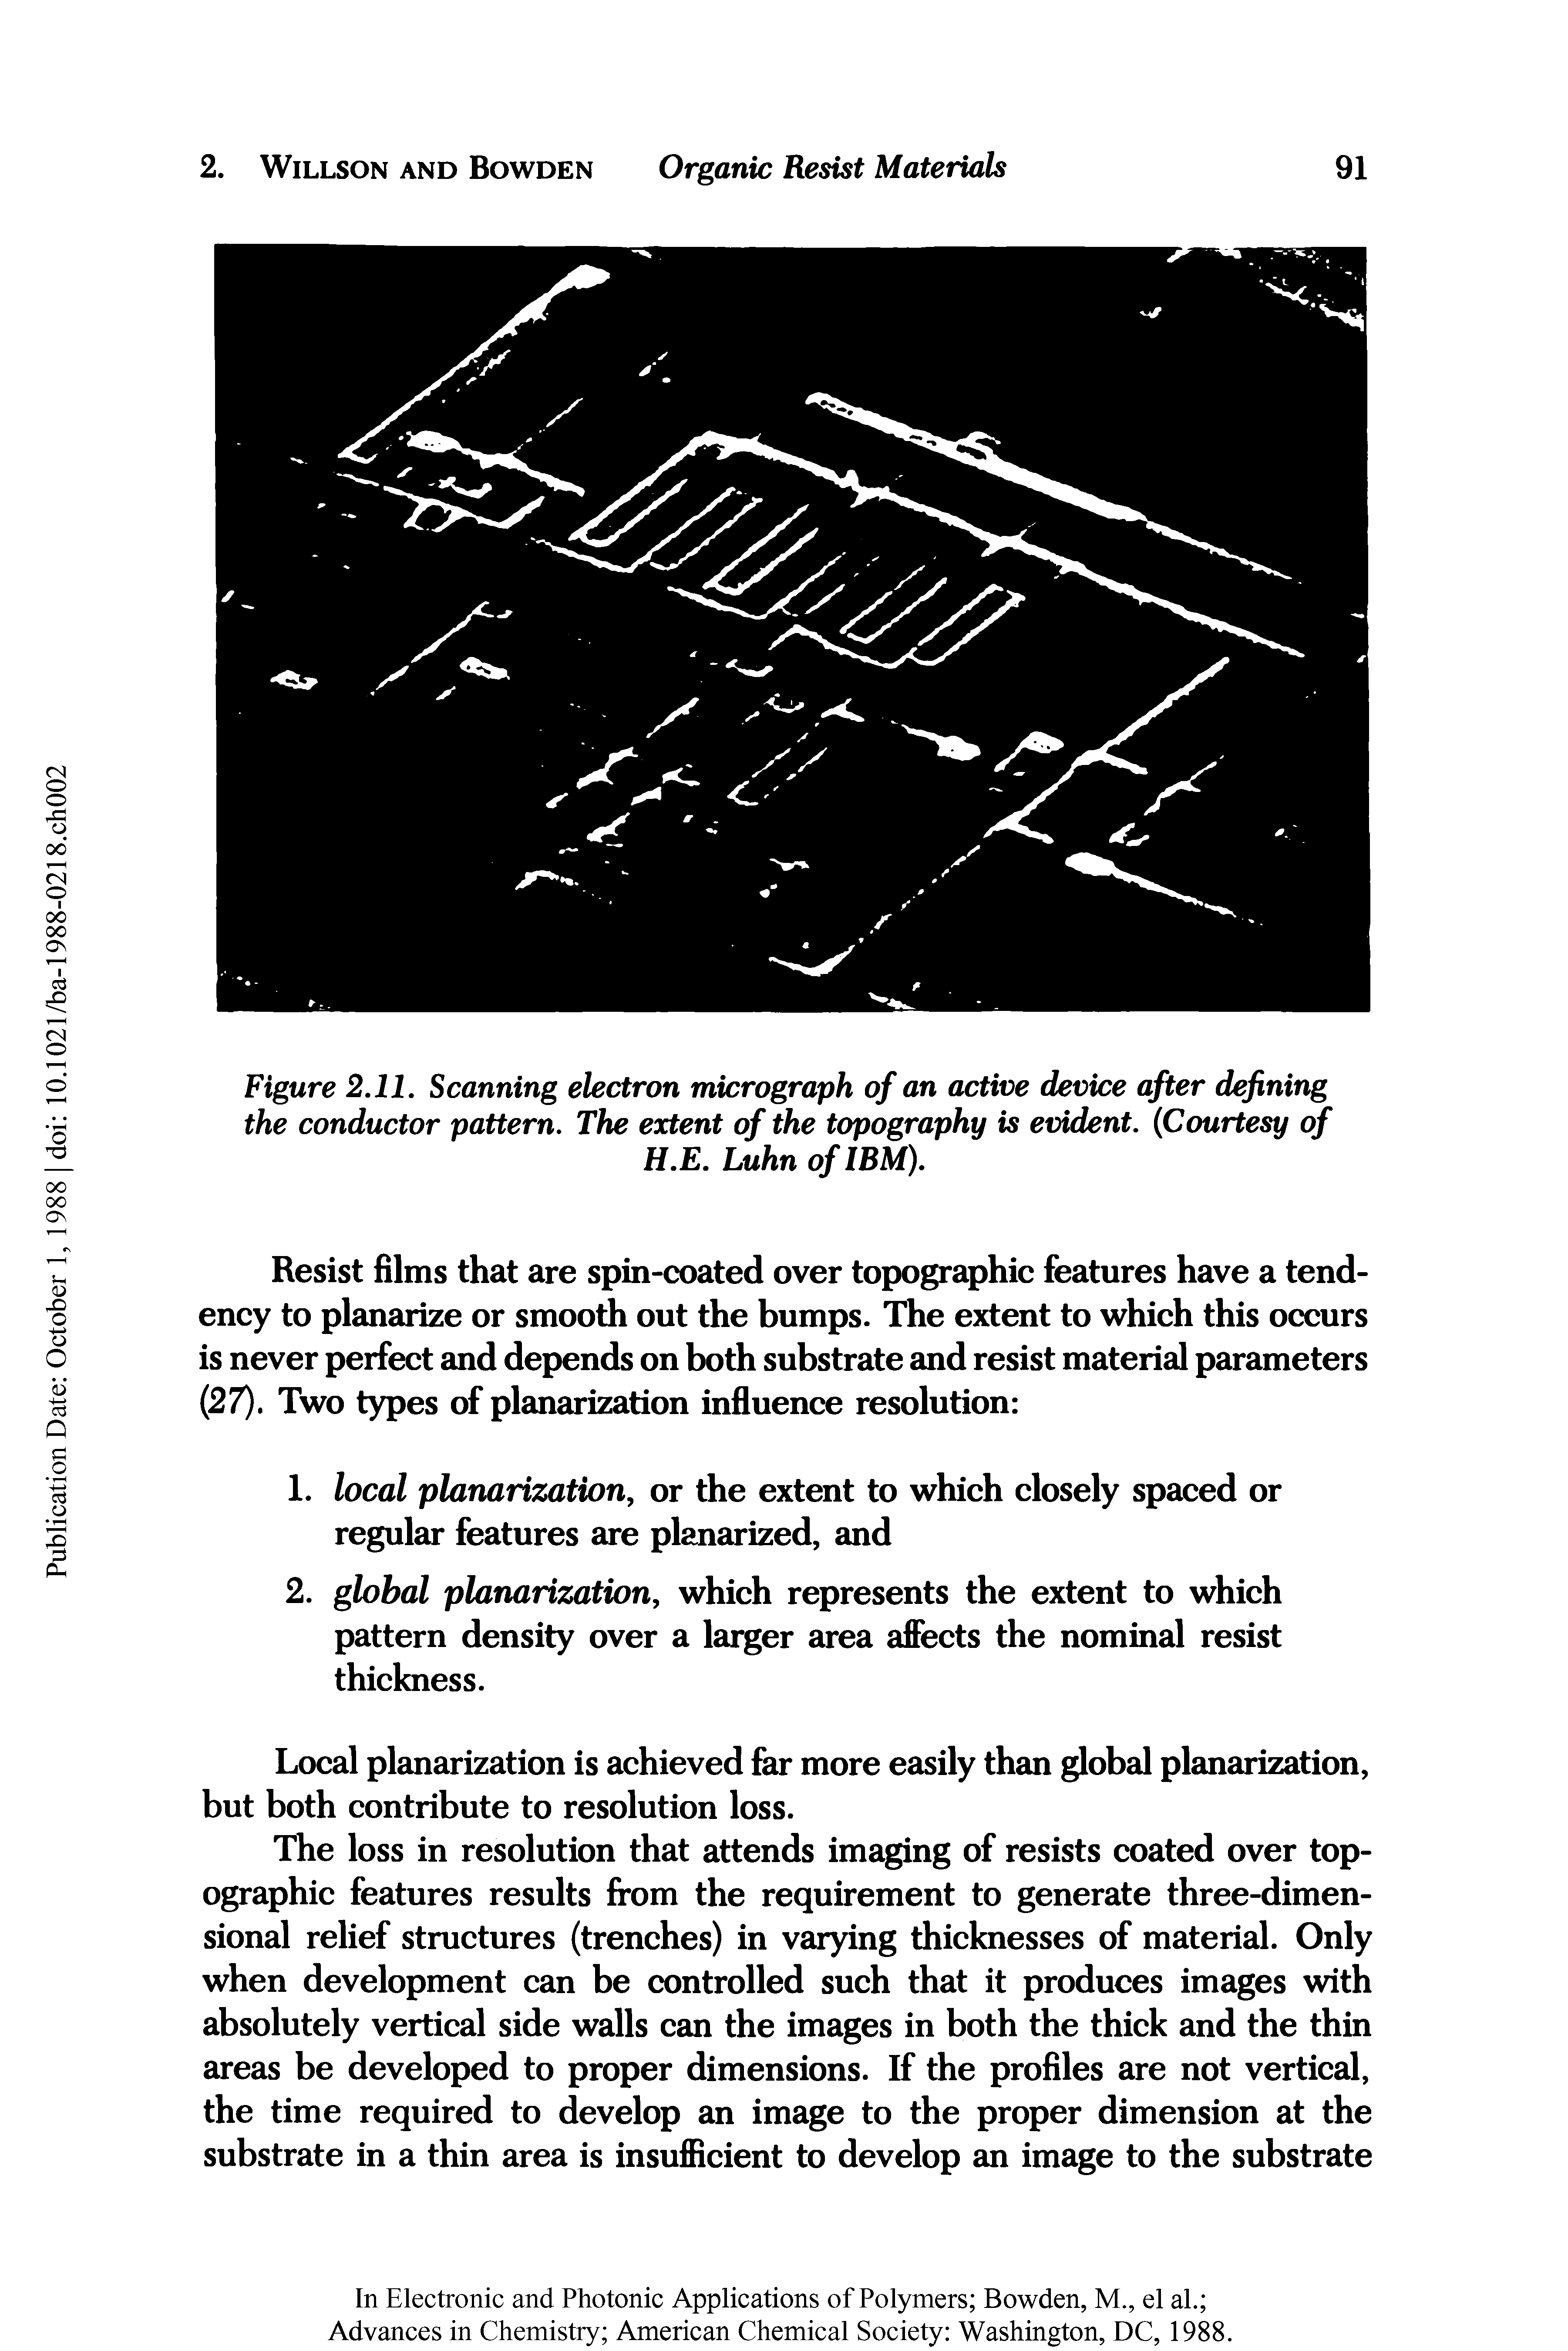 Figure 2.11. Scanning electron micrograph of an active device after defining the conductor pattern. The extent of the topography is evident. Courtesy of...